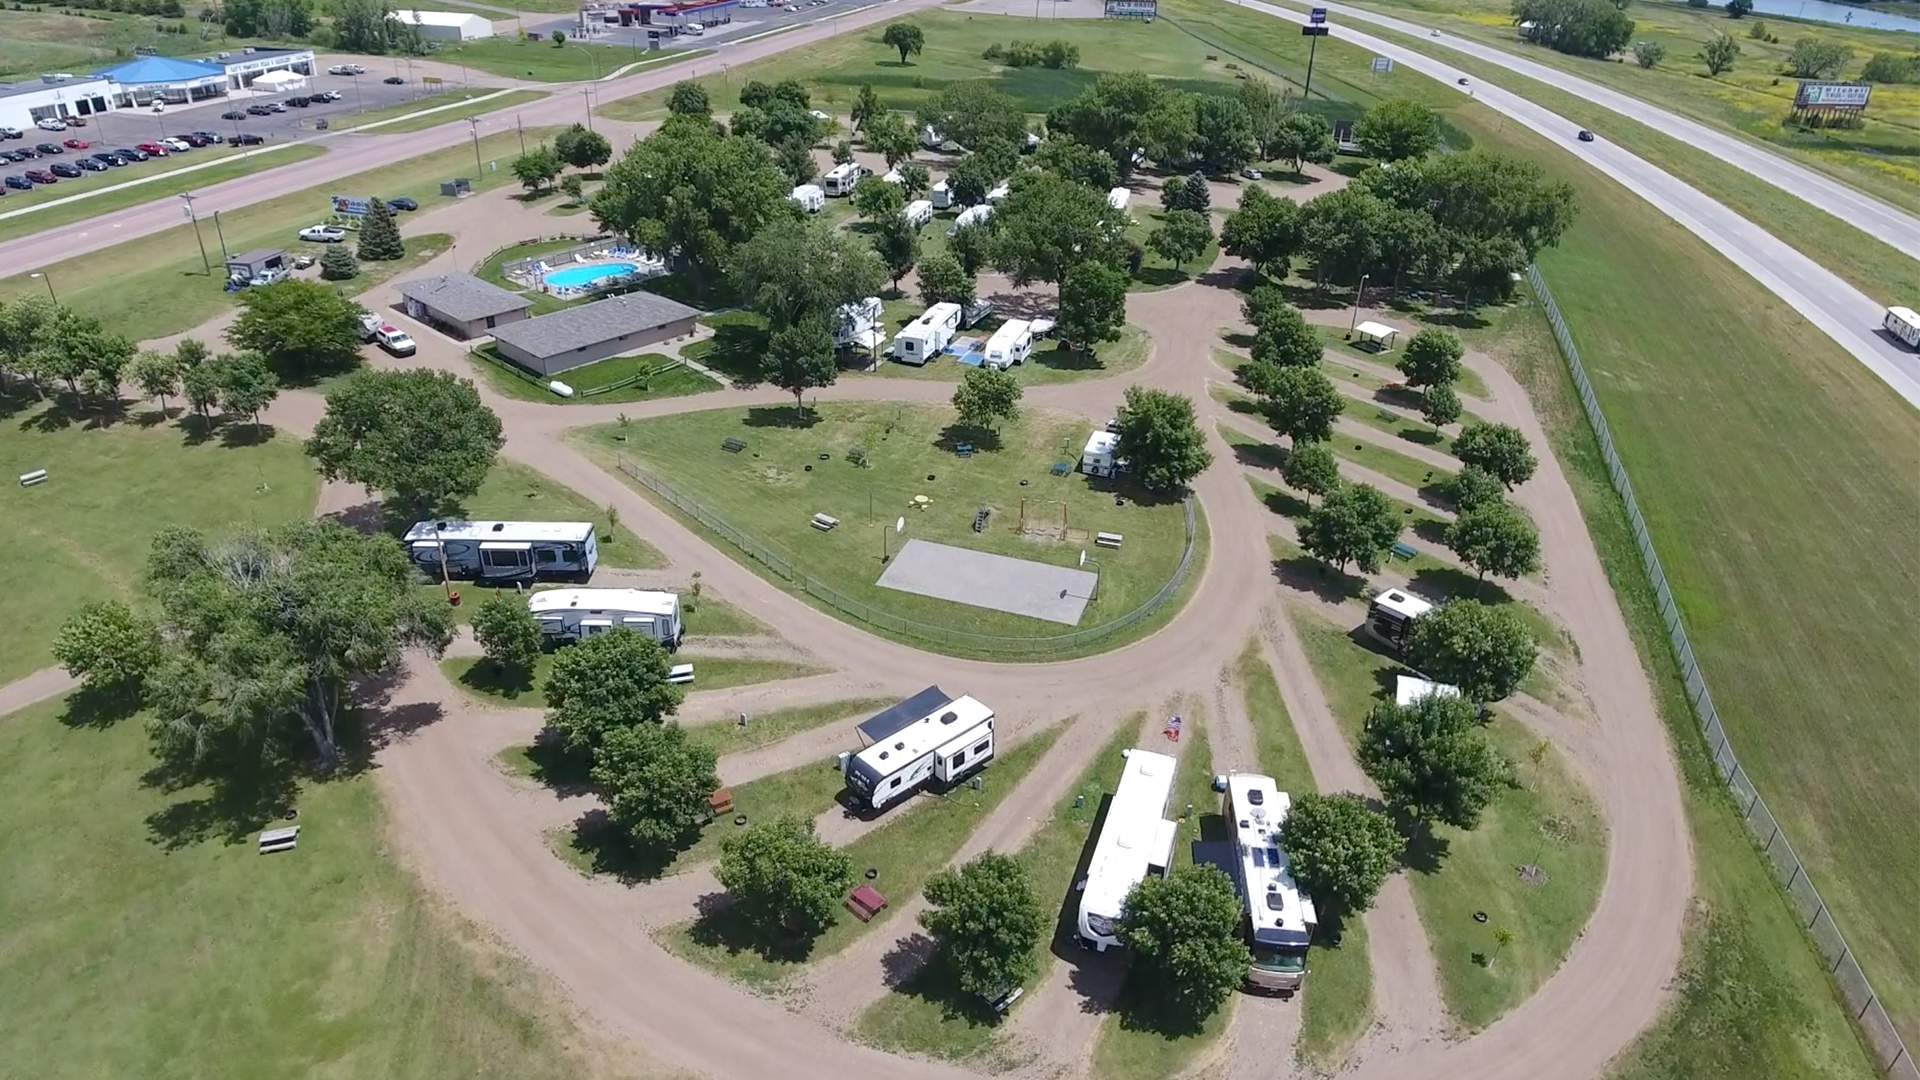 Oasis Campground overhead view